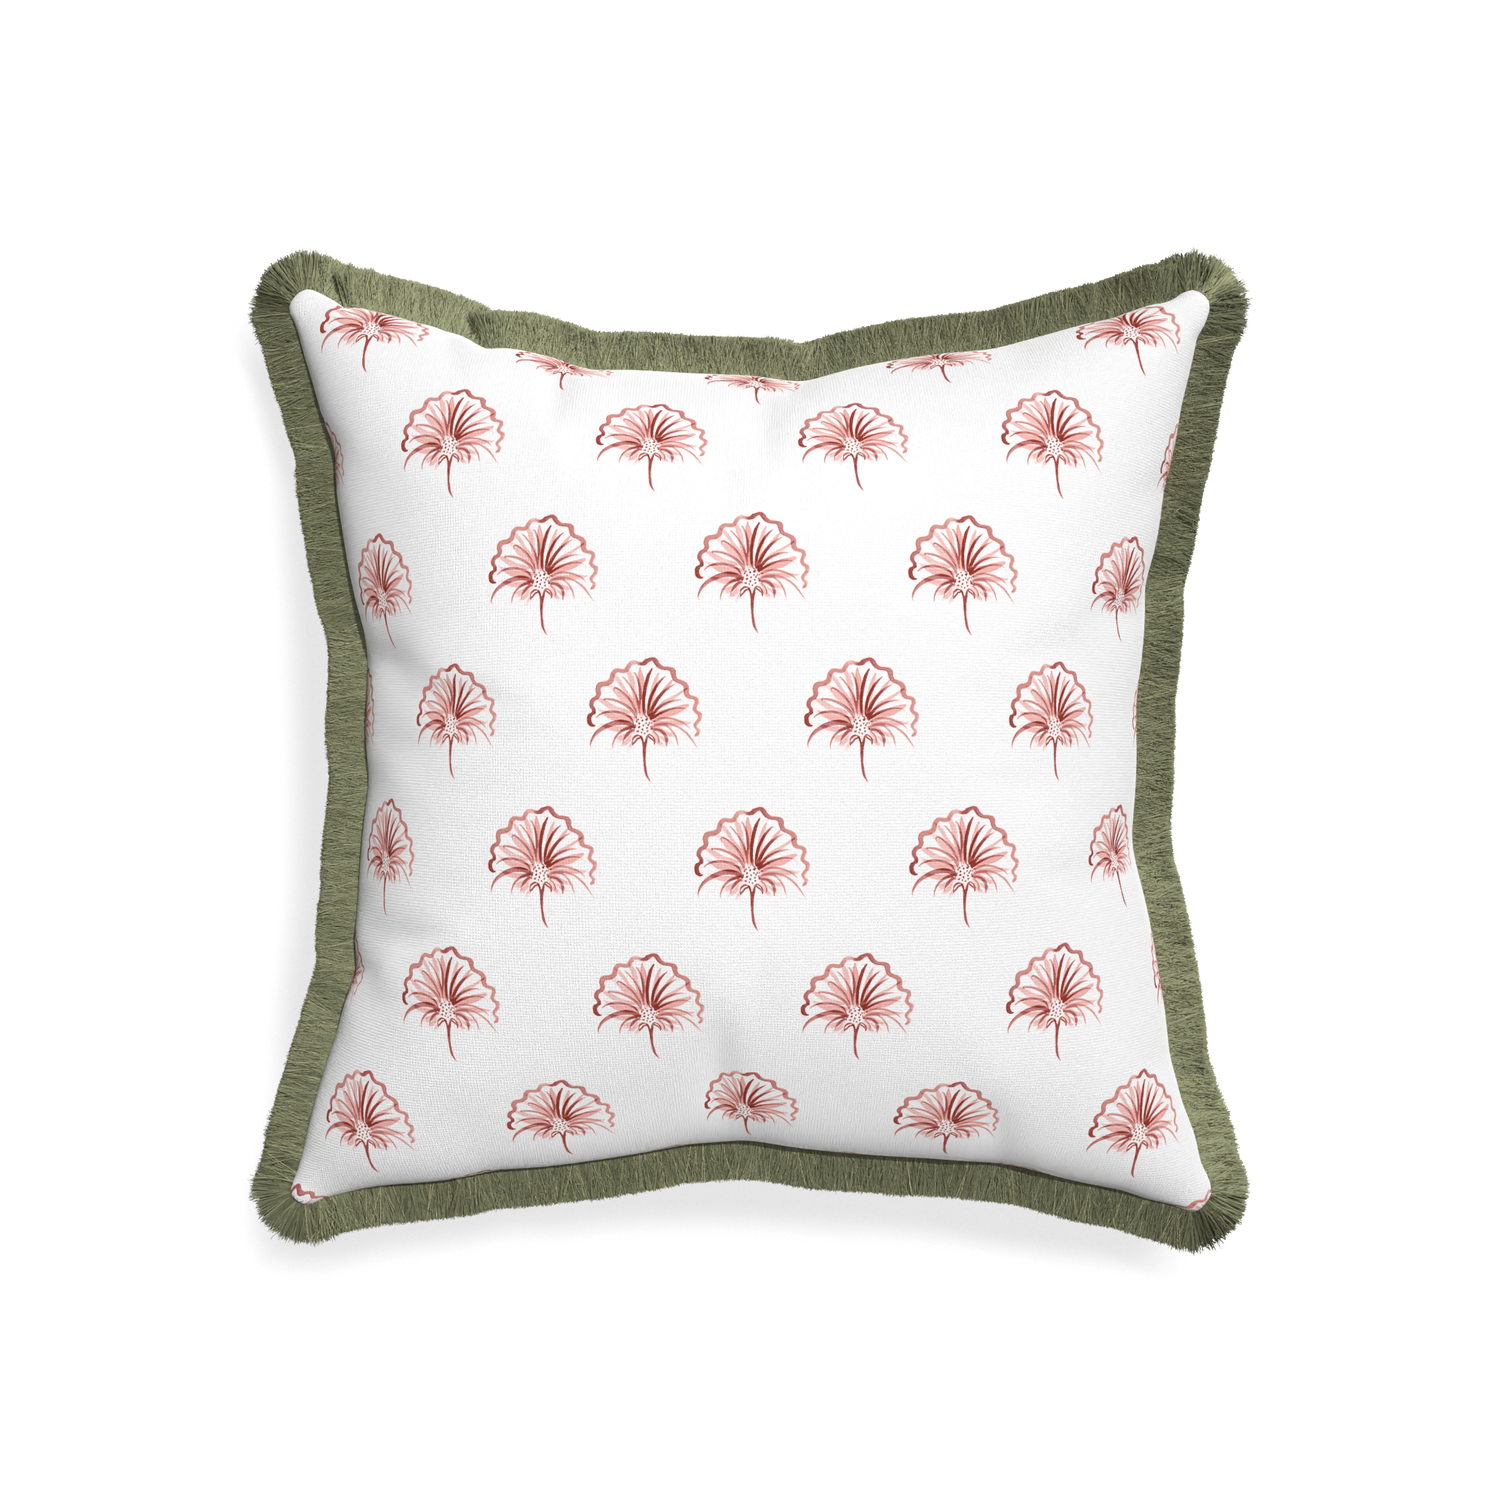 20-square penelope rose custom floral pinkpillow with sage fringe on white background